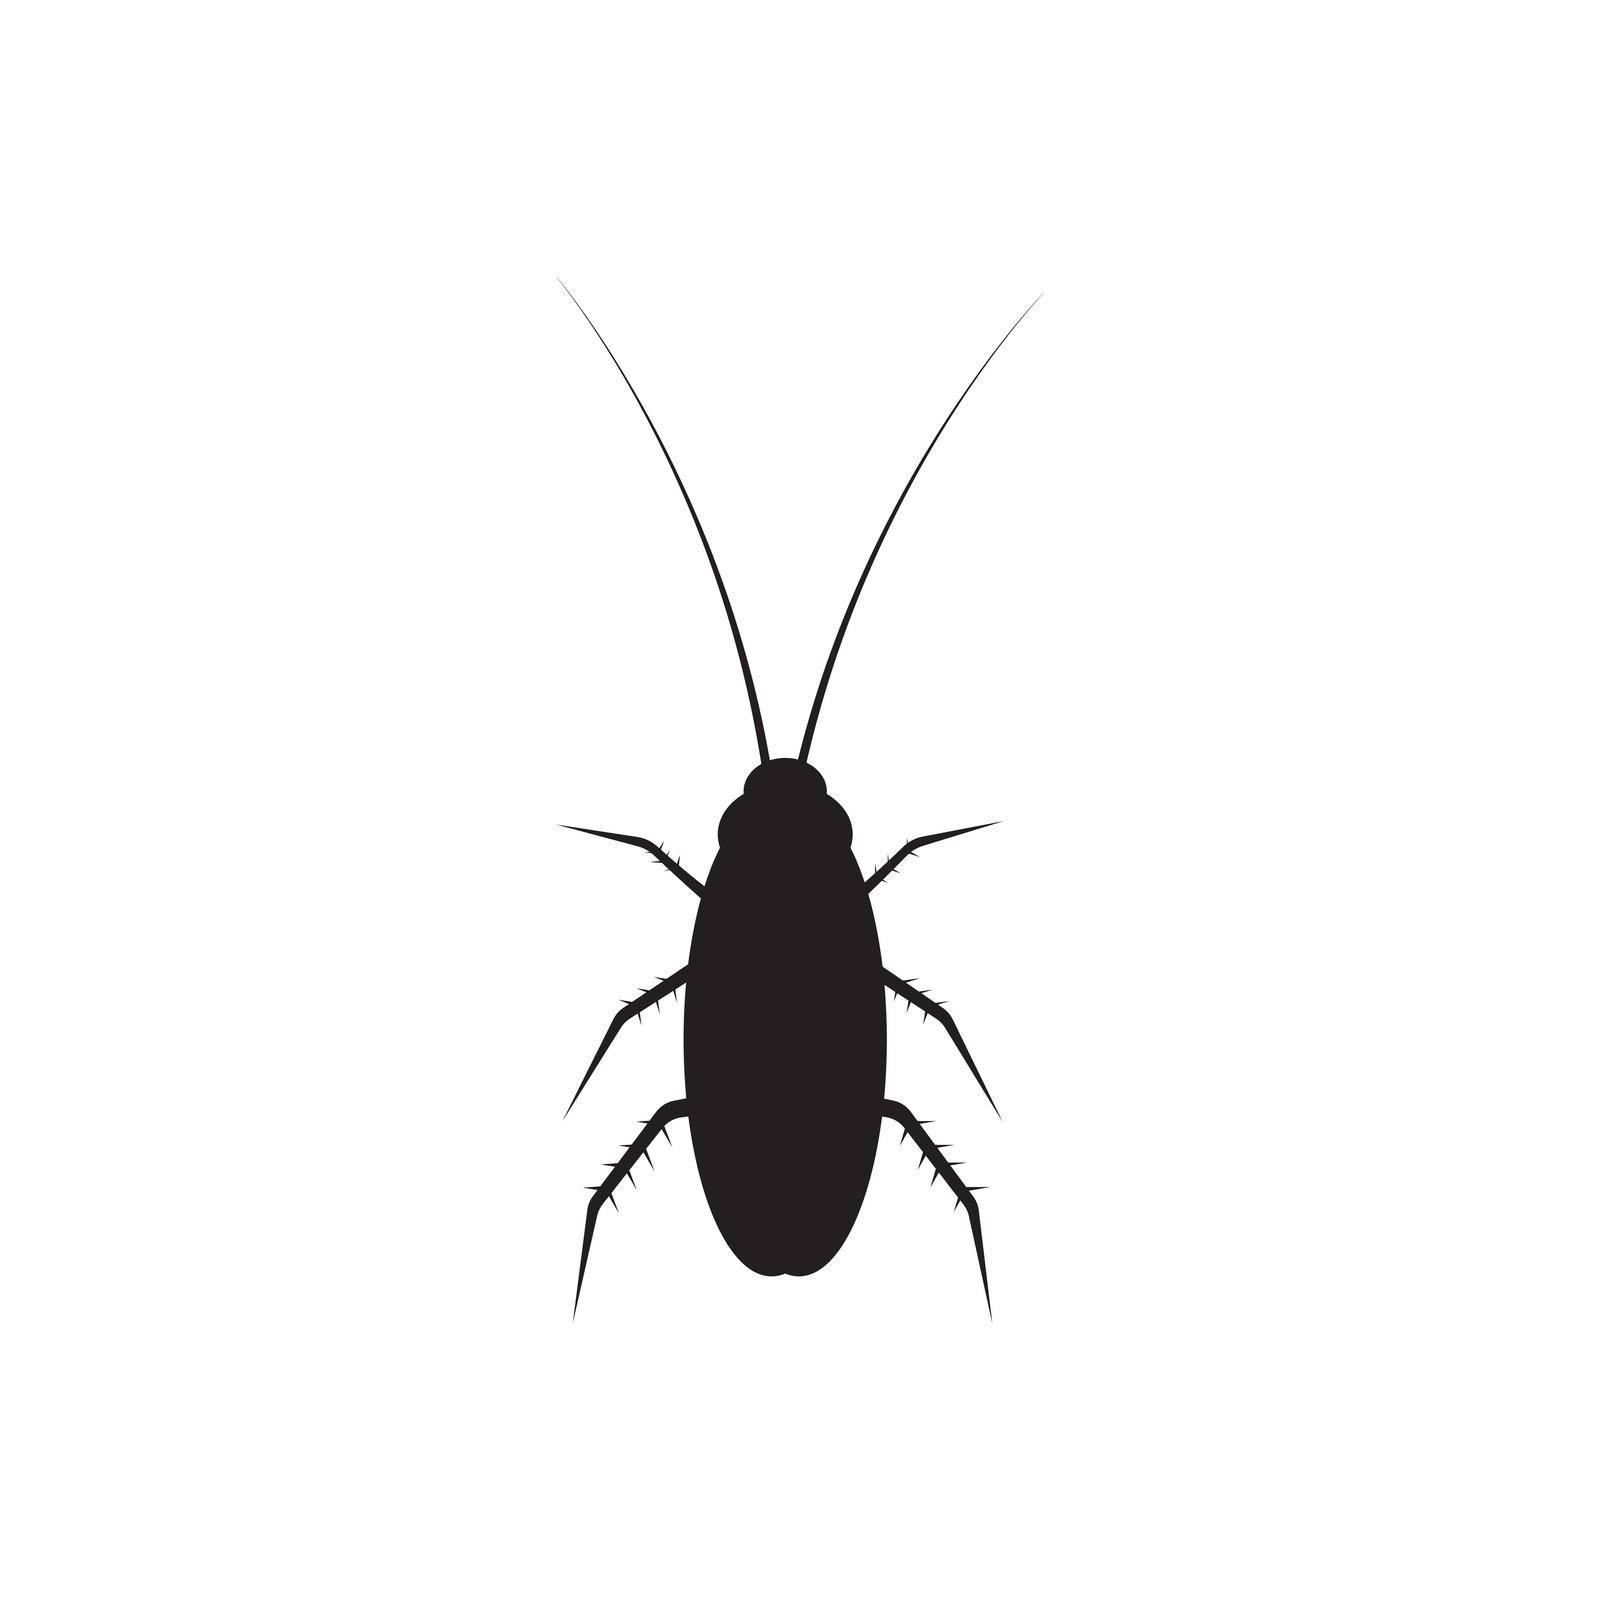 Cockroach icon template vector by ABD03